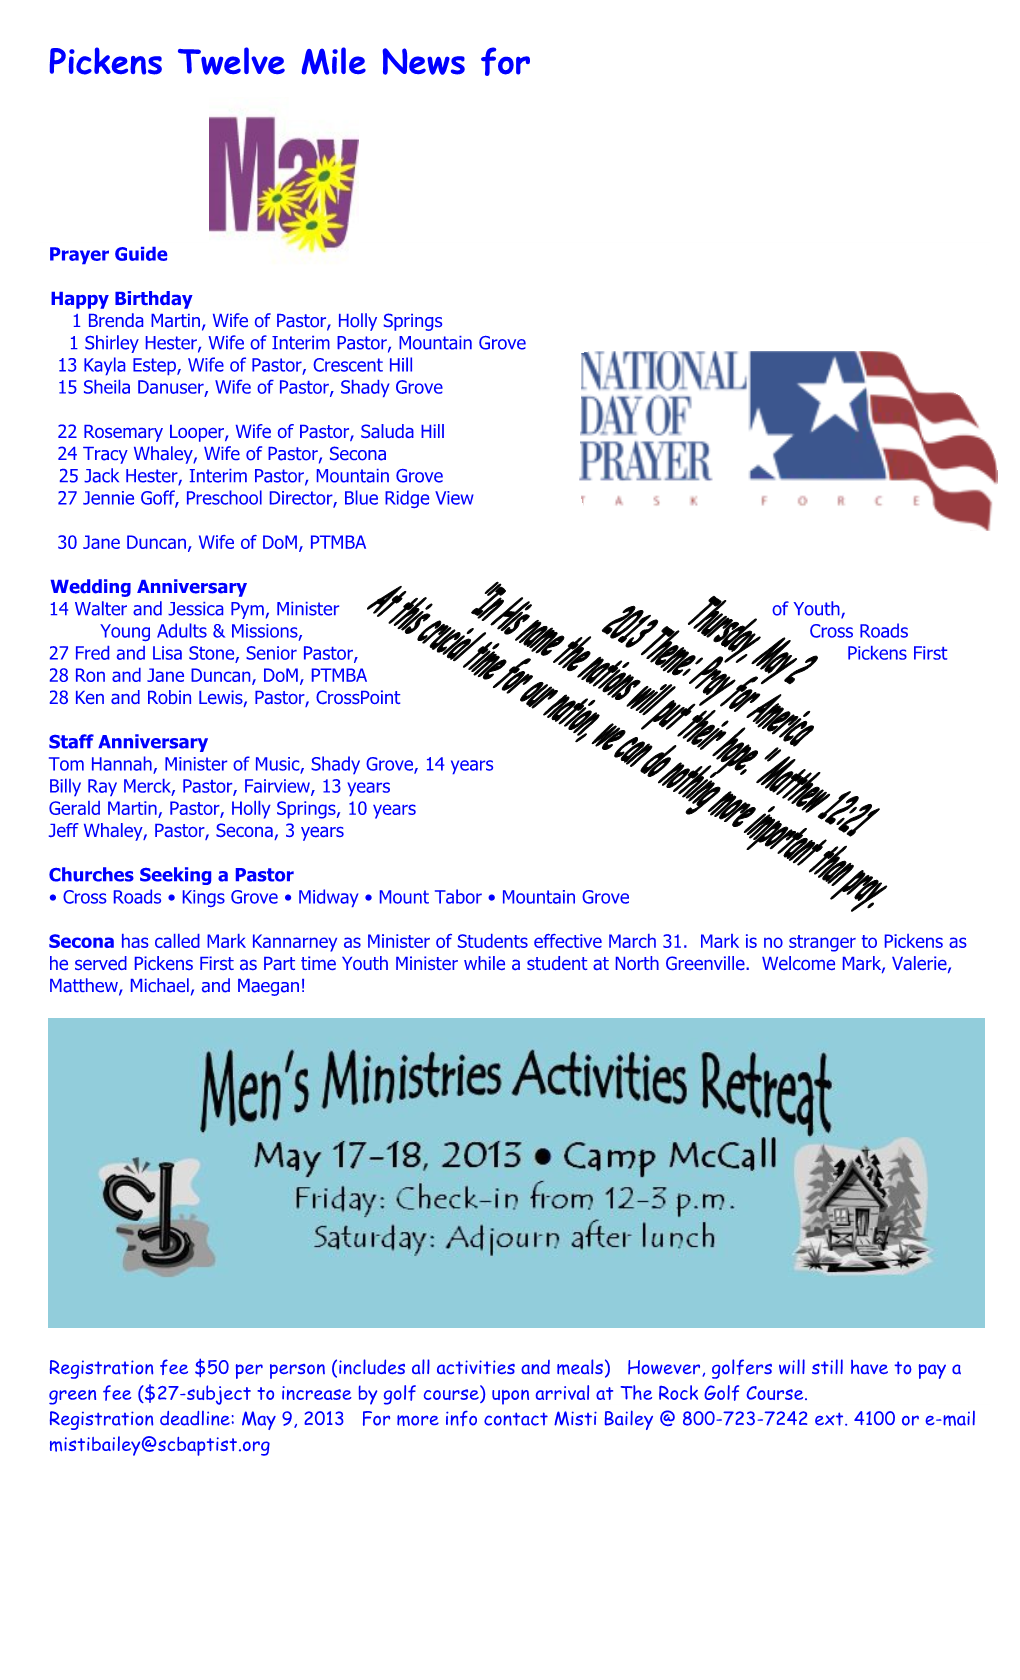 Pickens Twelve Mile News for May, 2013